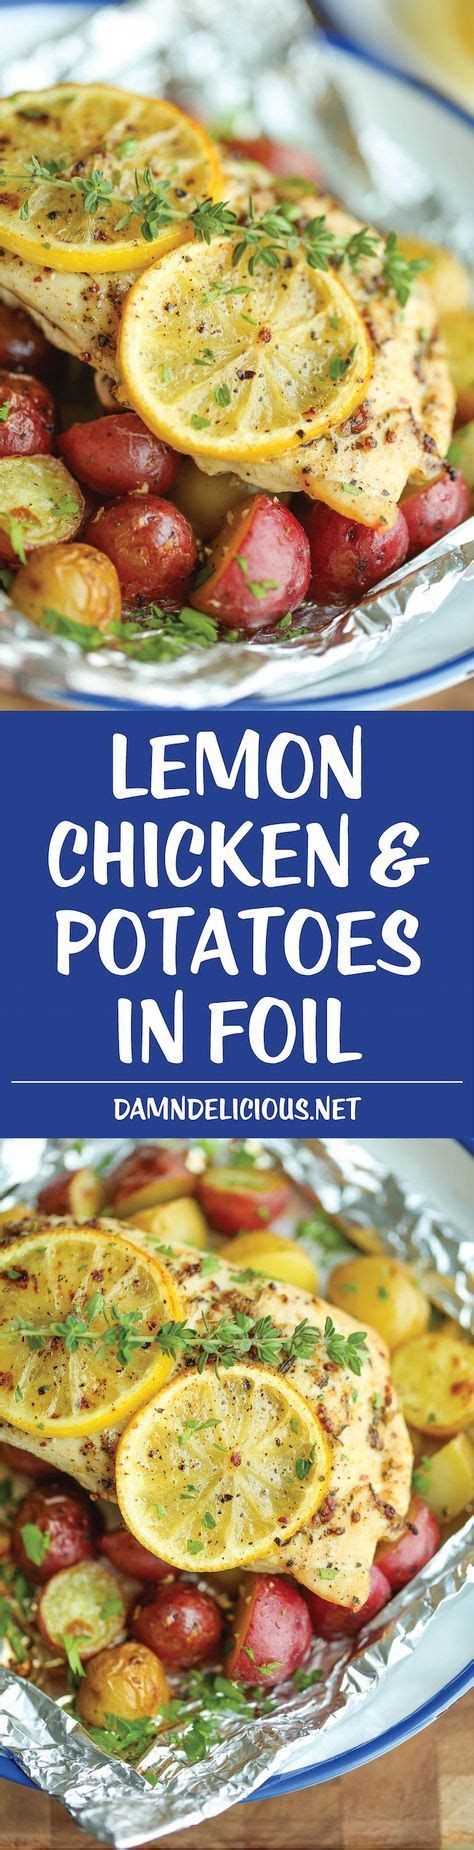 This chicken recipe is made even easier thanks to a few 'cheats'. Lemon Chicken and Potatoes in Foil | Recipe | Food recipes ...